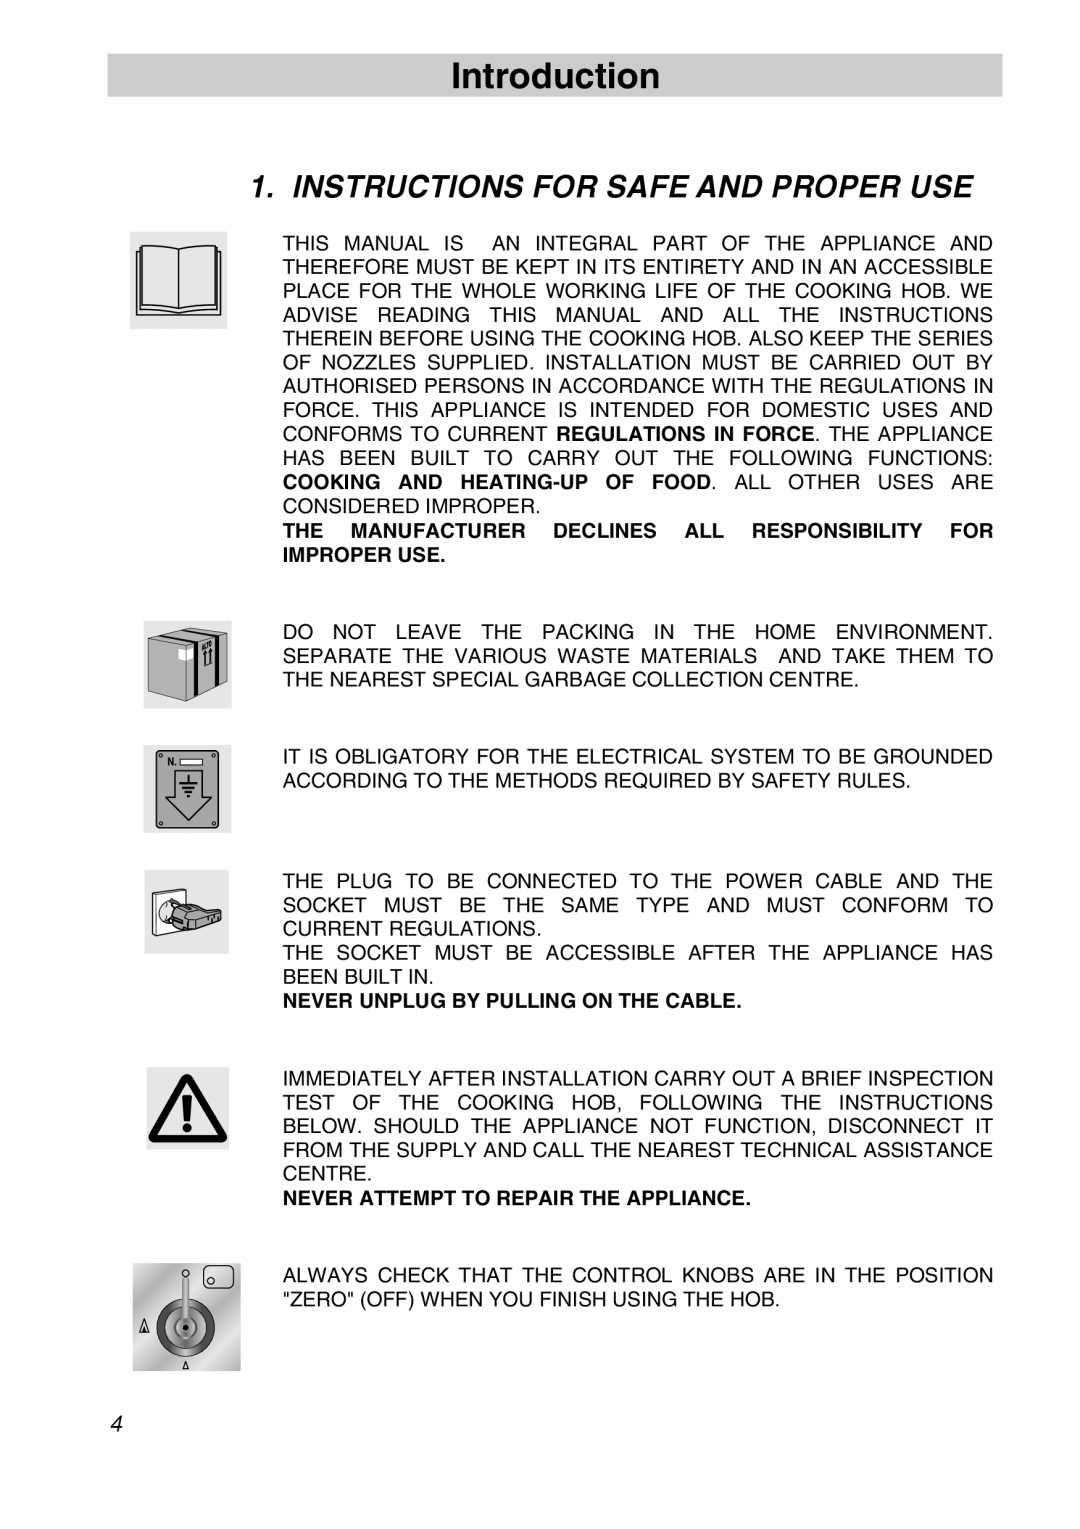 Smeg CIR60XS manual Introduction, Instructions For Safe And Proper Use, Never Unplug By Pulling On The Cable 